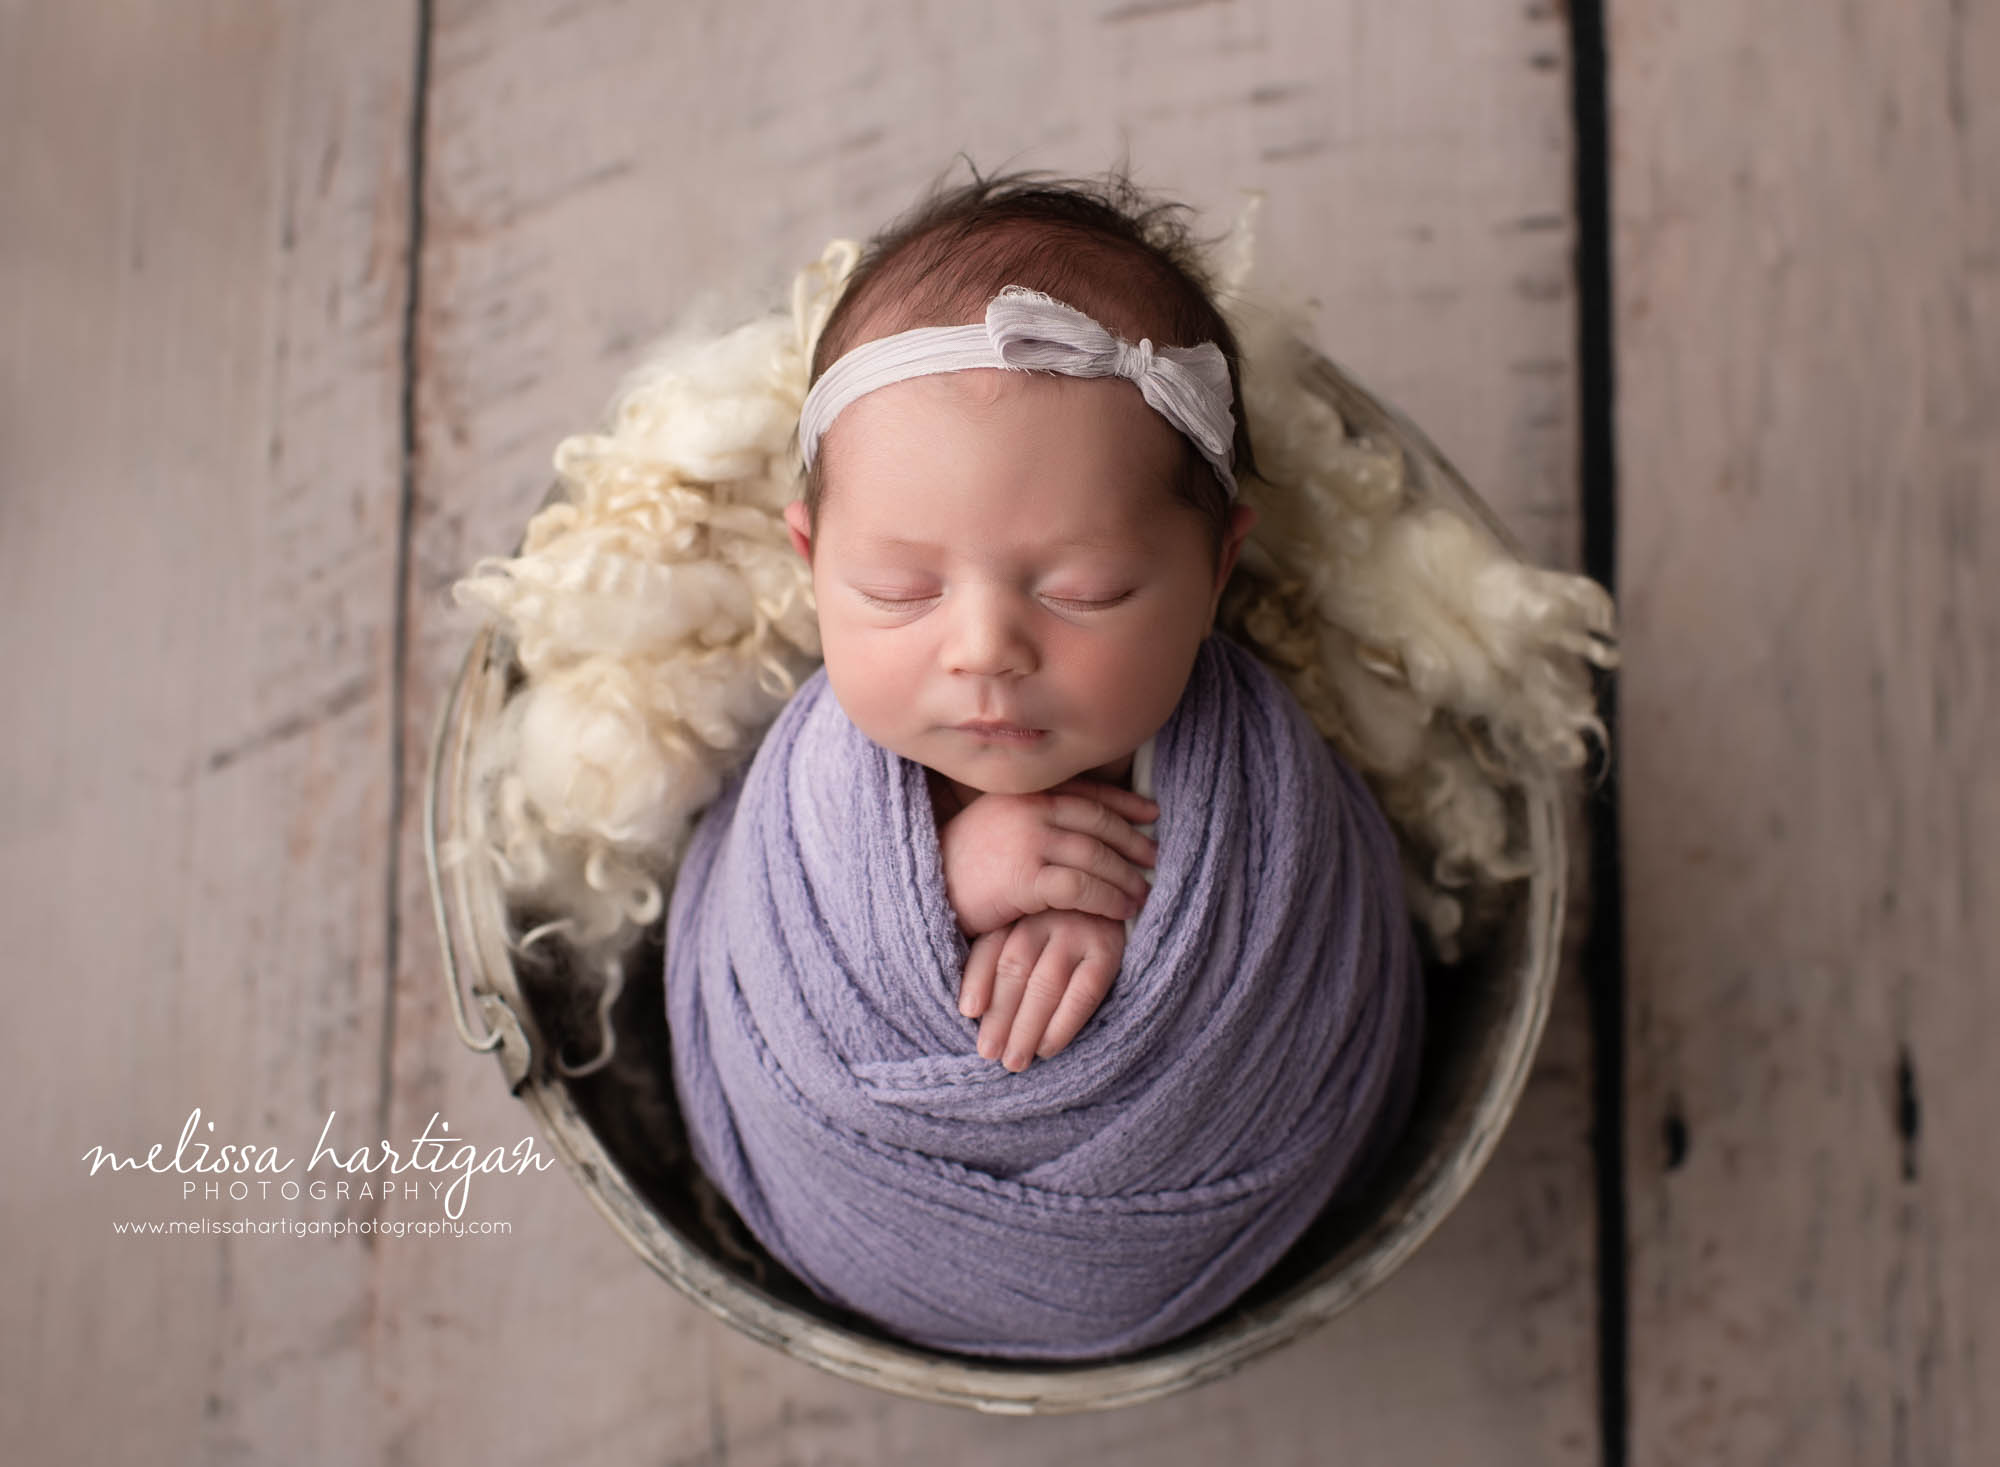 Baby girl wrapped in purple wrap with purple headband posed in bucket Connecticut newborn photographer